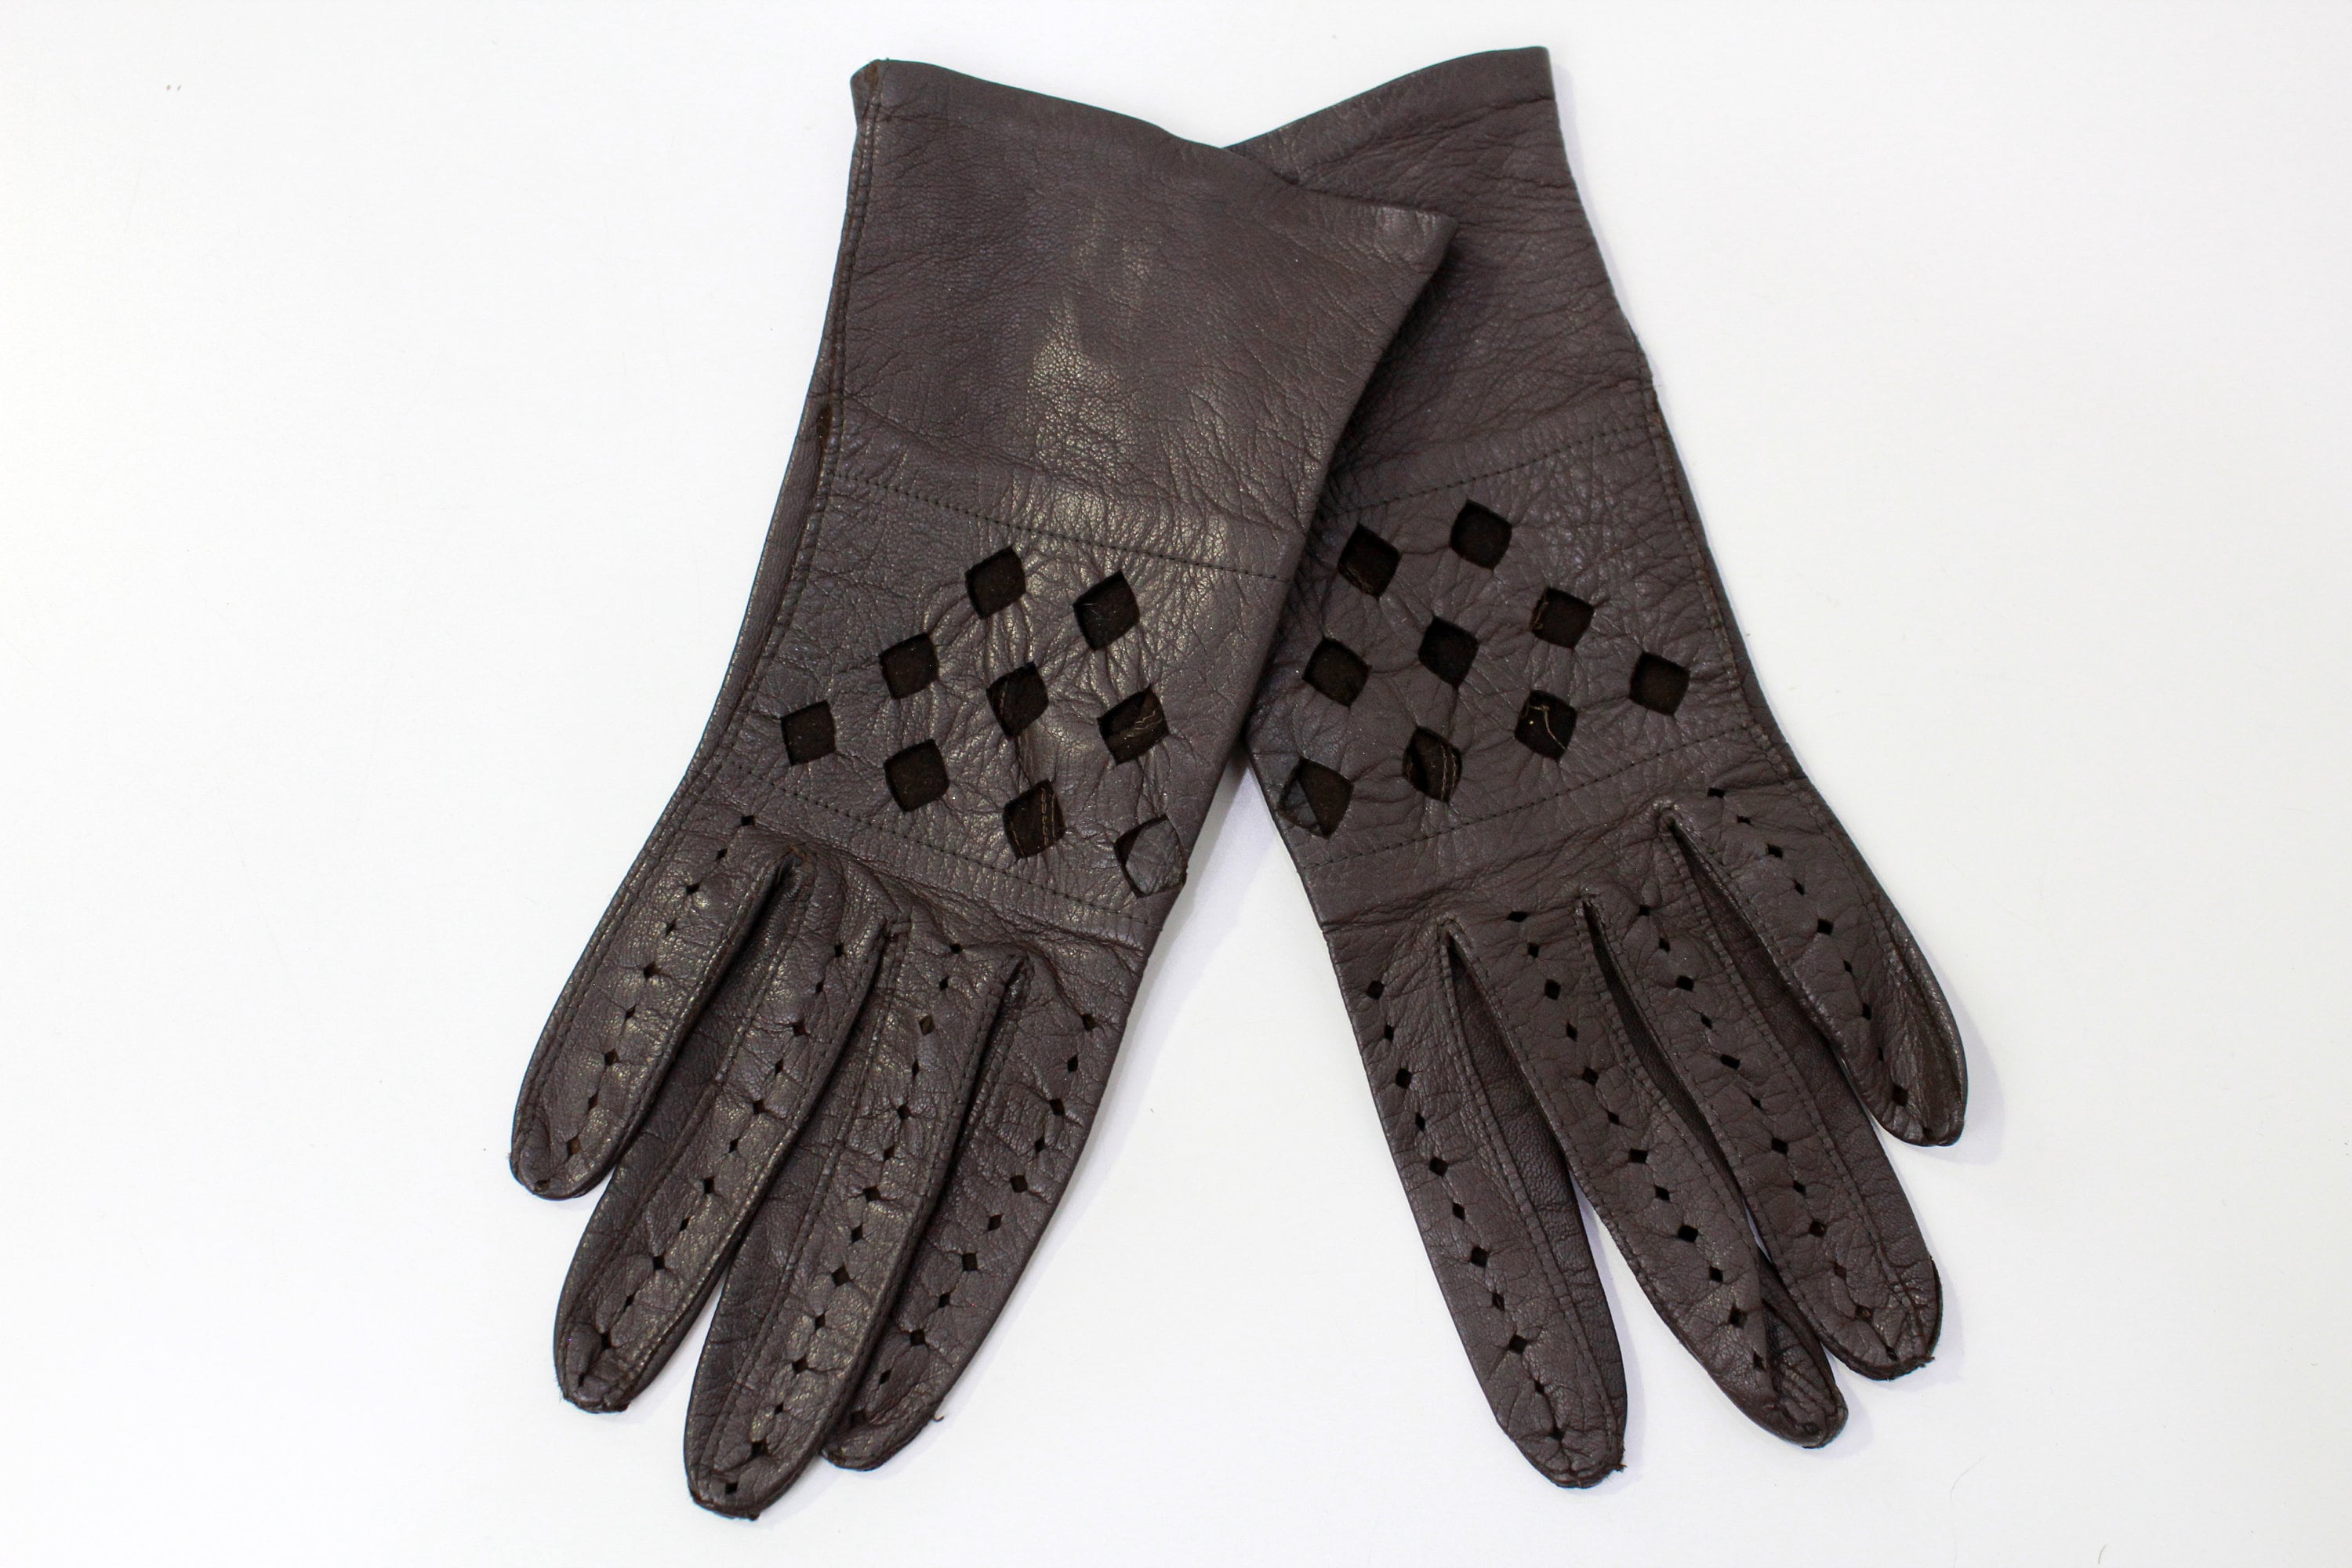 Vintage Driving Gloves Women's, Brown Leather, Perforated and Diamond Cut Outs, Ladie's Gloves